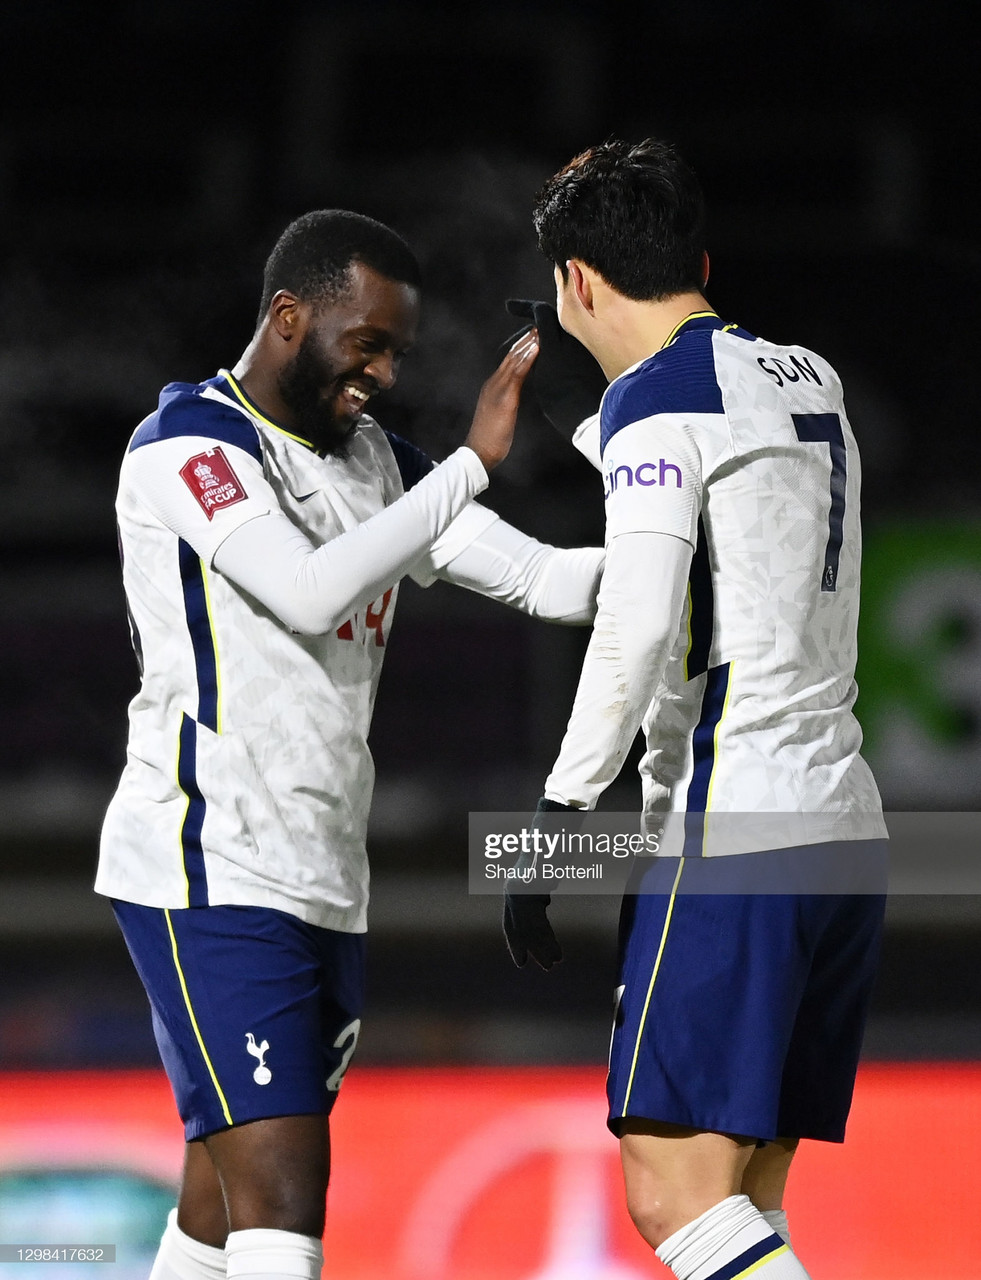 Wycombe Wanderers 1-4 Tottenham Hotspur: A double from Tanguy Ndombele sees of FA Cup upset